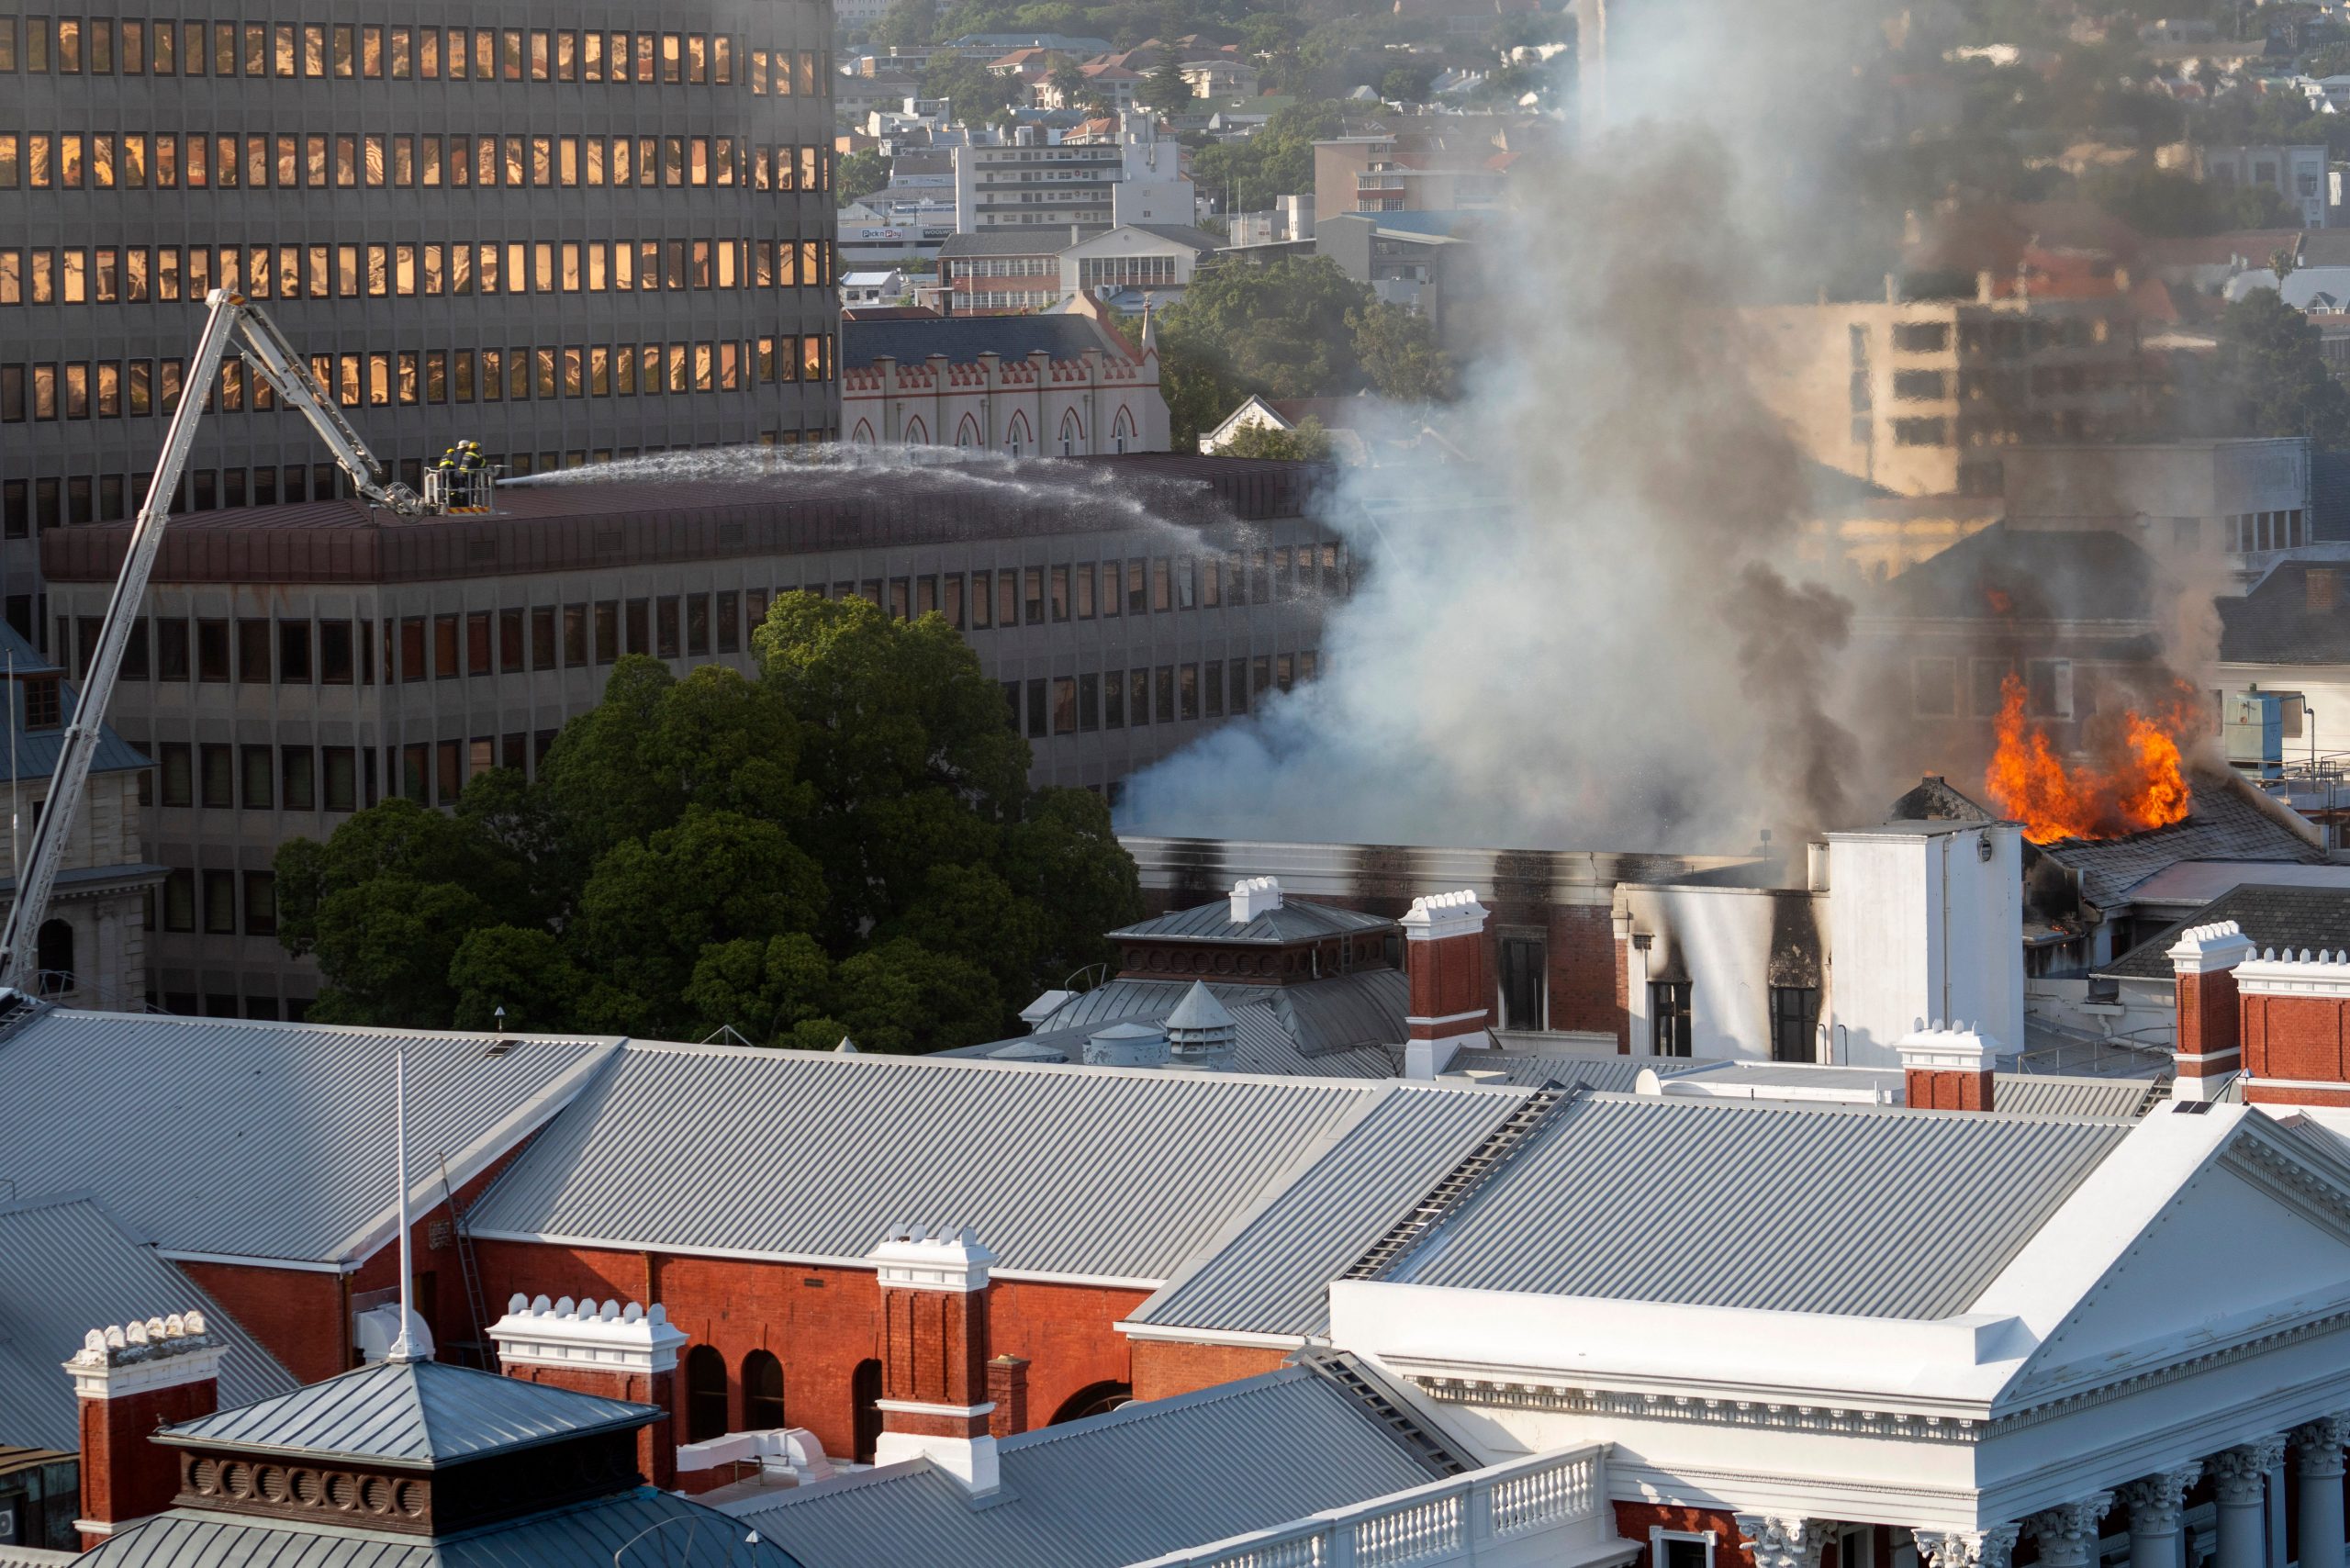 Fire reignites at South Africa’s Parliament in Cape Town